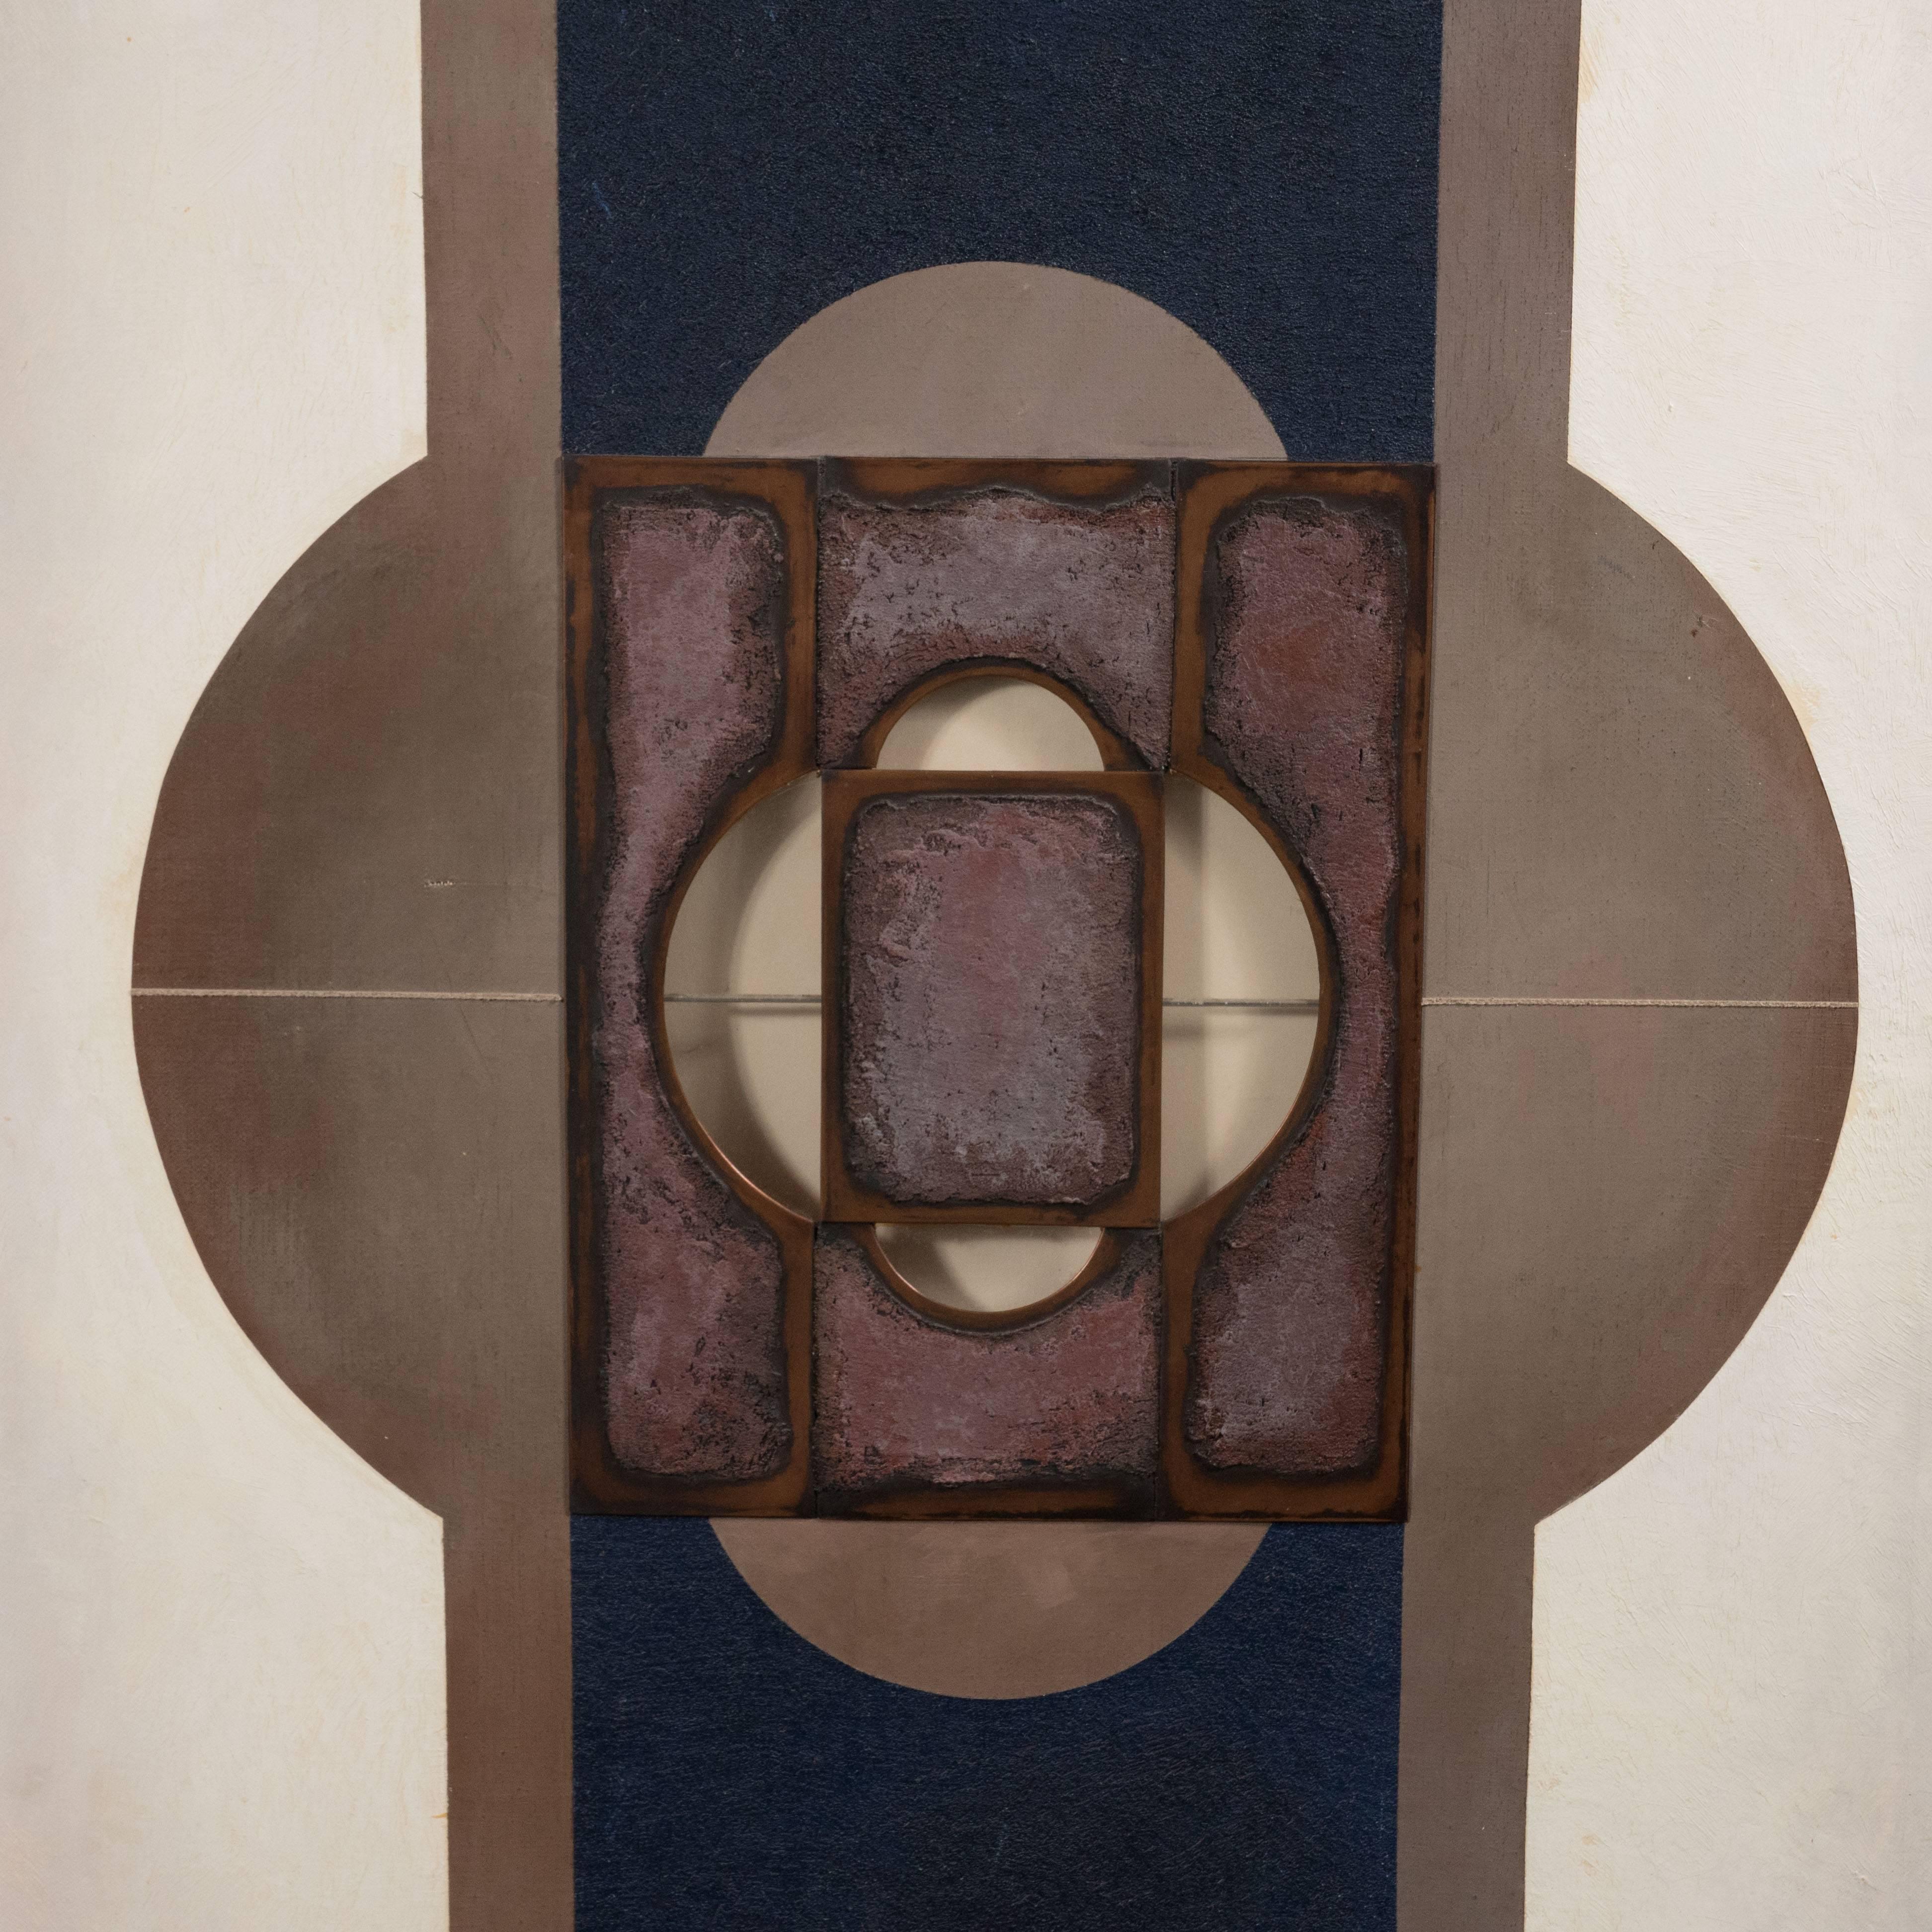 This compelling abstract painting was realized by the esteemed Spanish Painter, Senen Ubina, circa 1975. It features a square brass plate with demilune forms cut out of the center. The plate has been painted in a rich aubergine hue exhibiting a rich